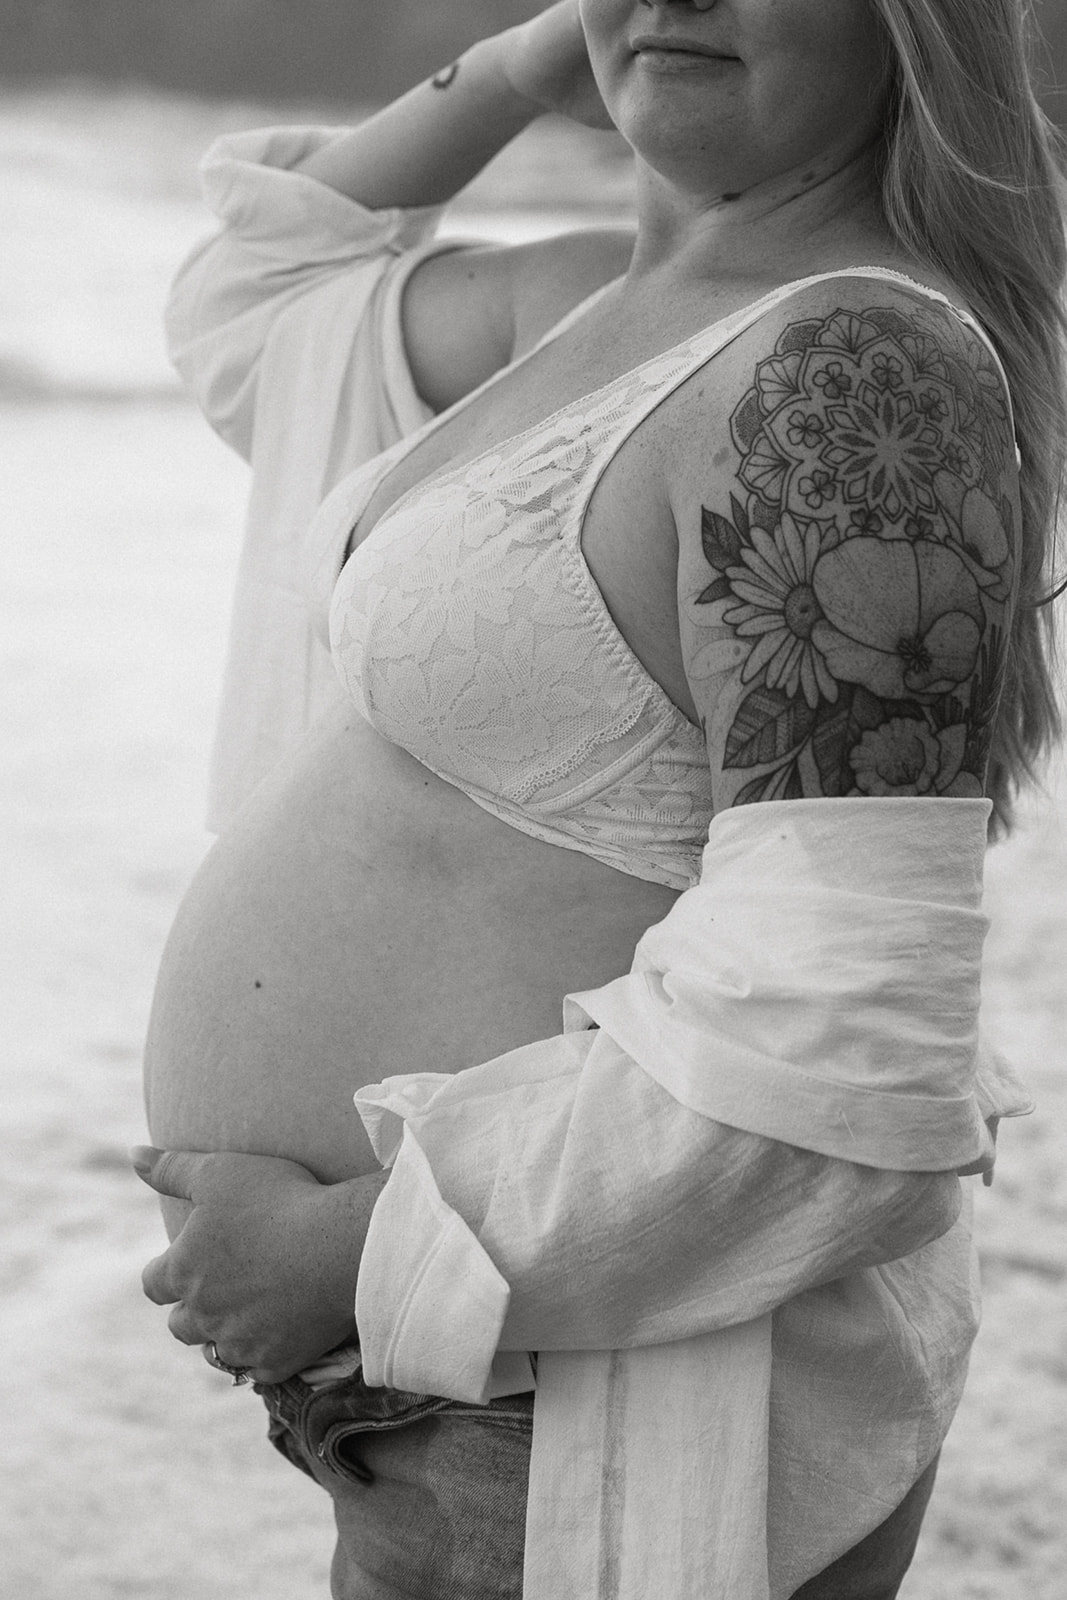 laguna beach socal southern california maternity family pictures best beaches locations photoshoot locations ideas photo